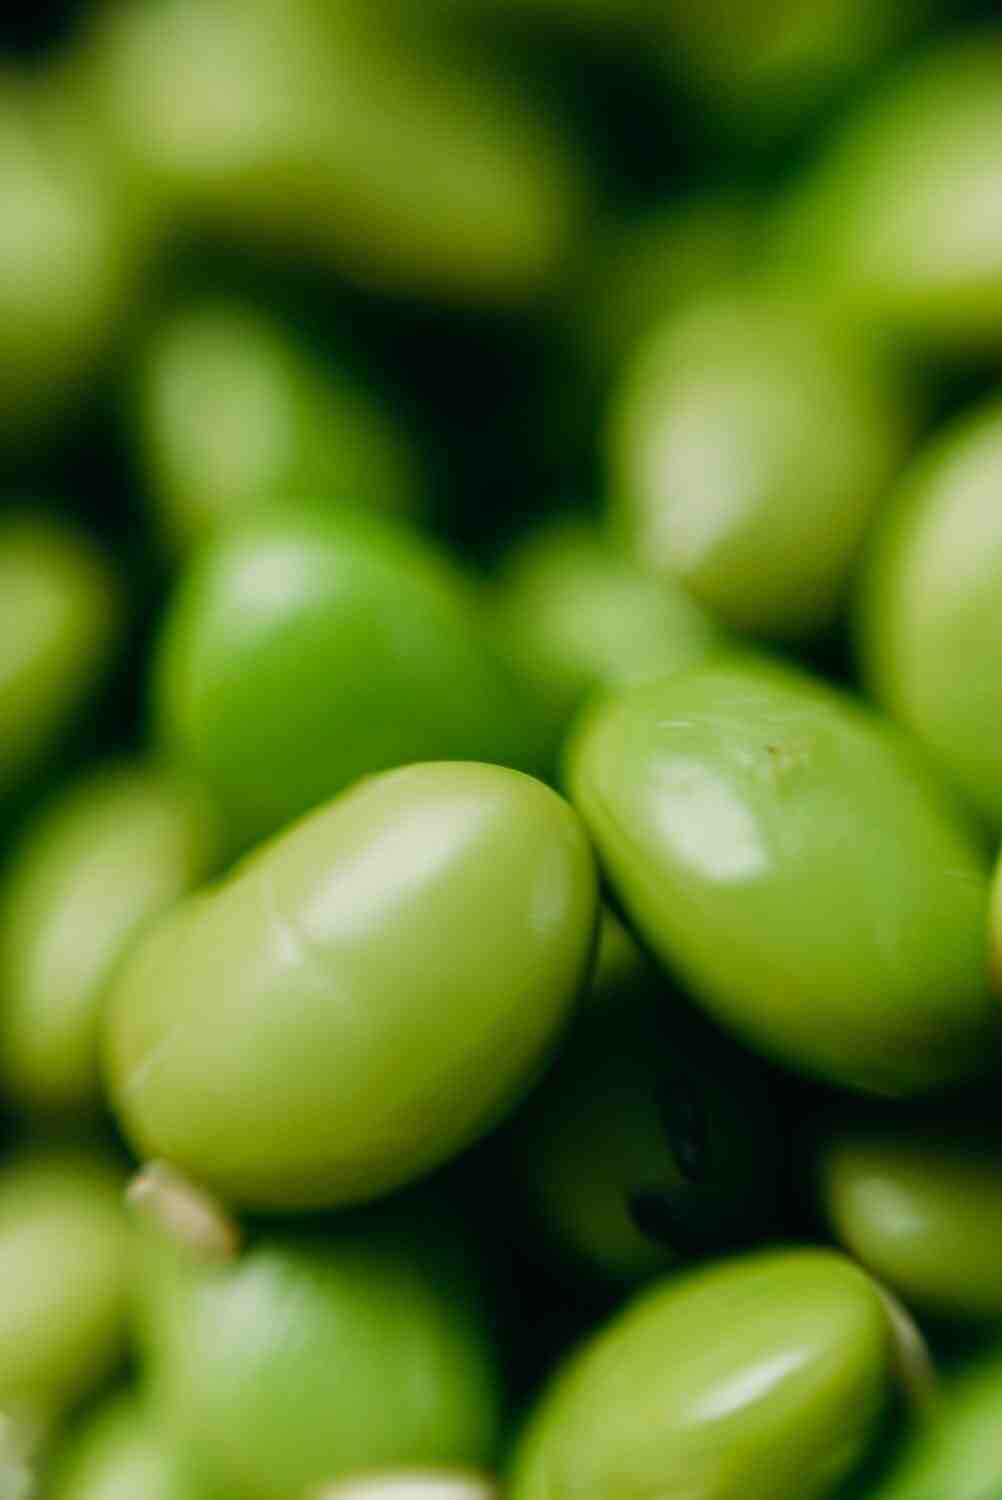 edamame or soybeans